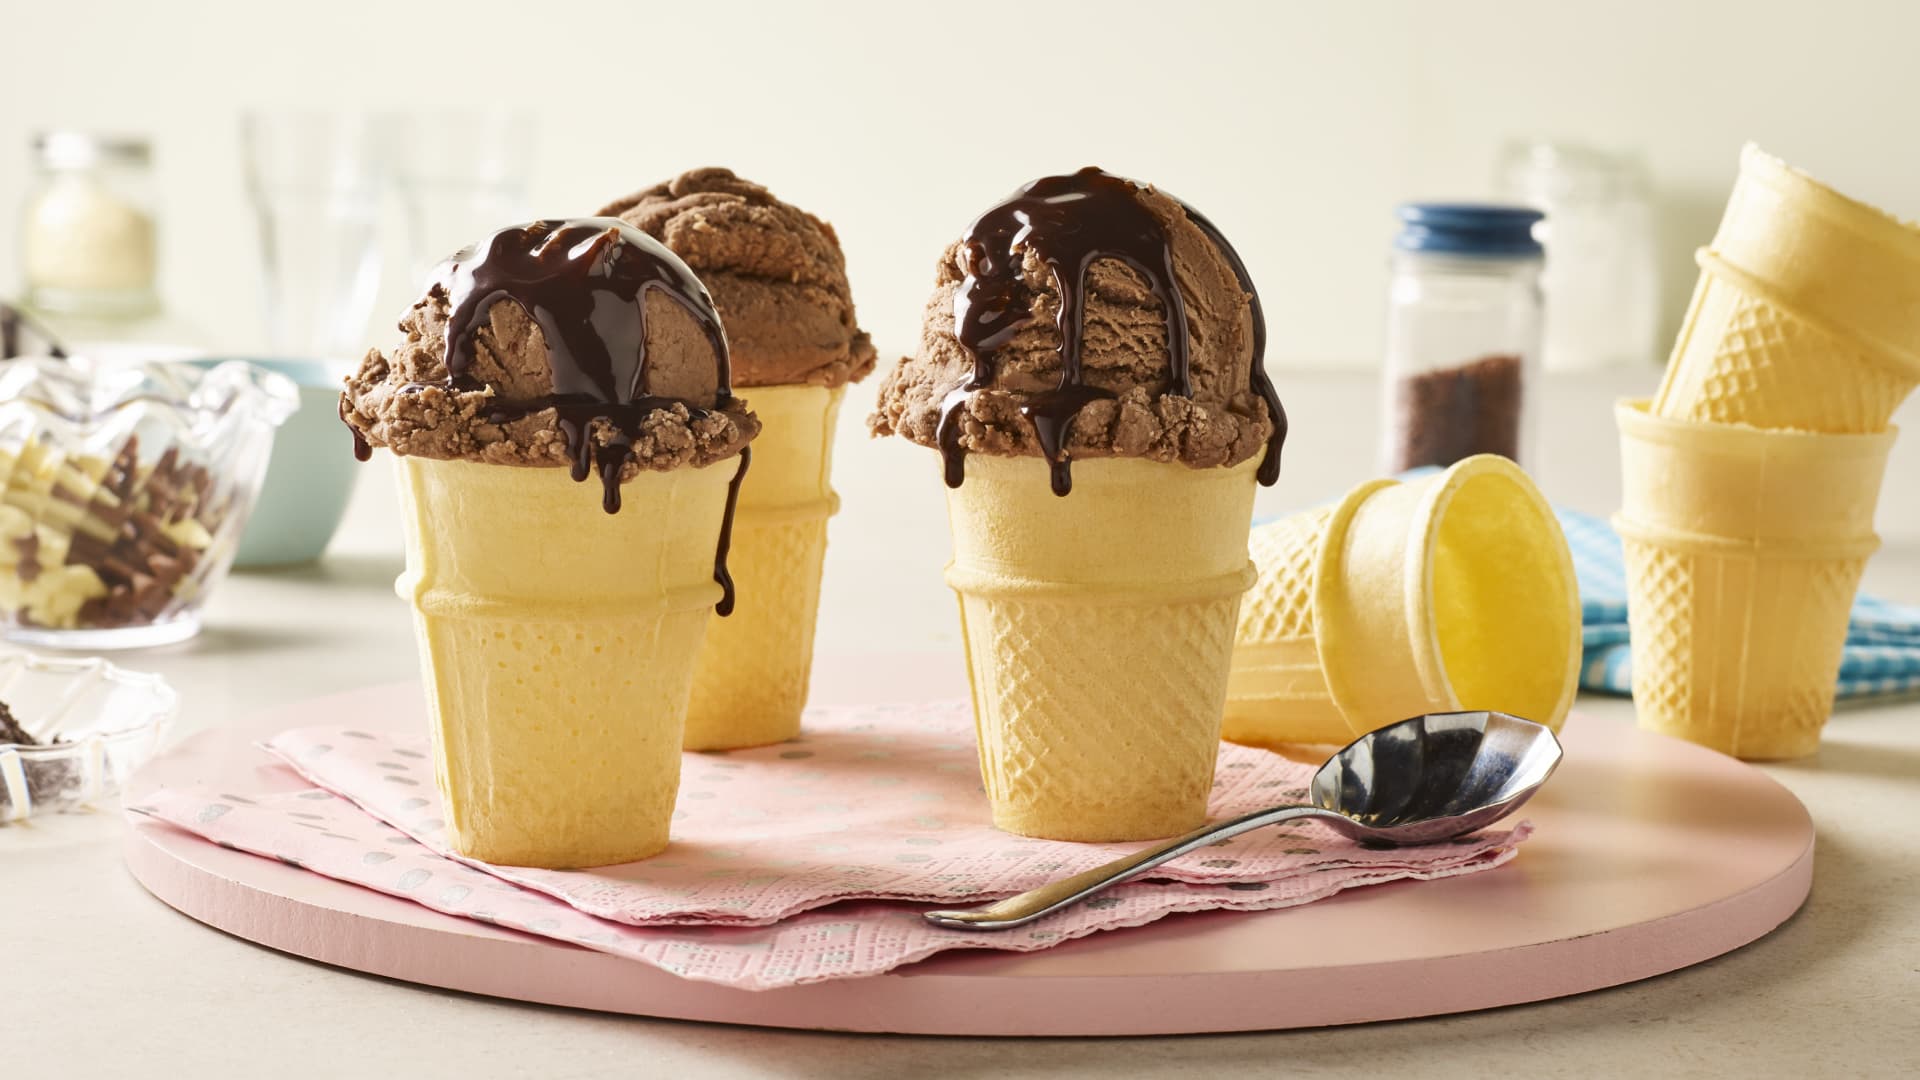 Wafer cones filled with chocolate ice cream and topped with chocolate sauce.